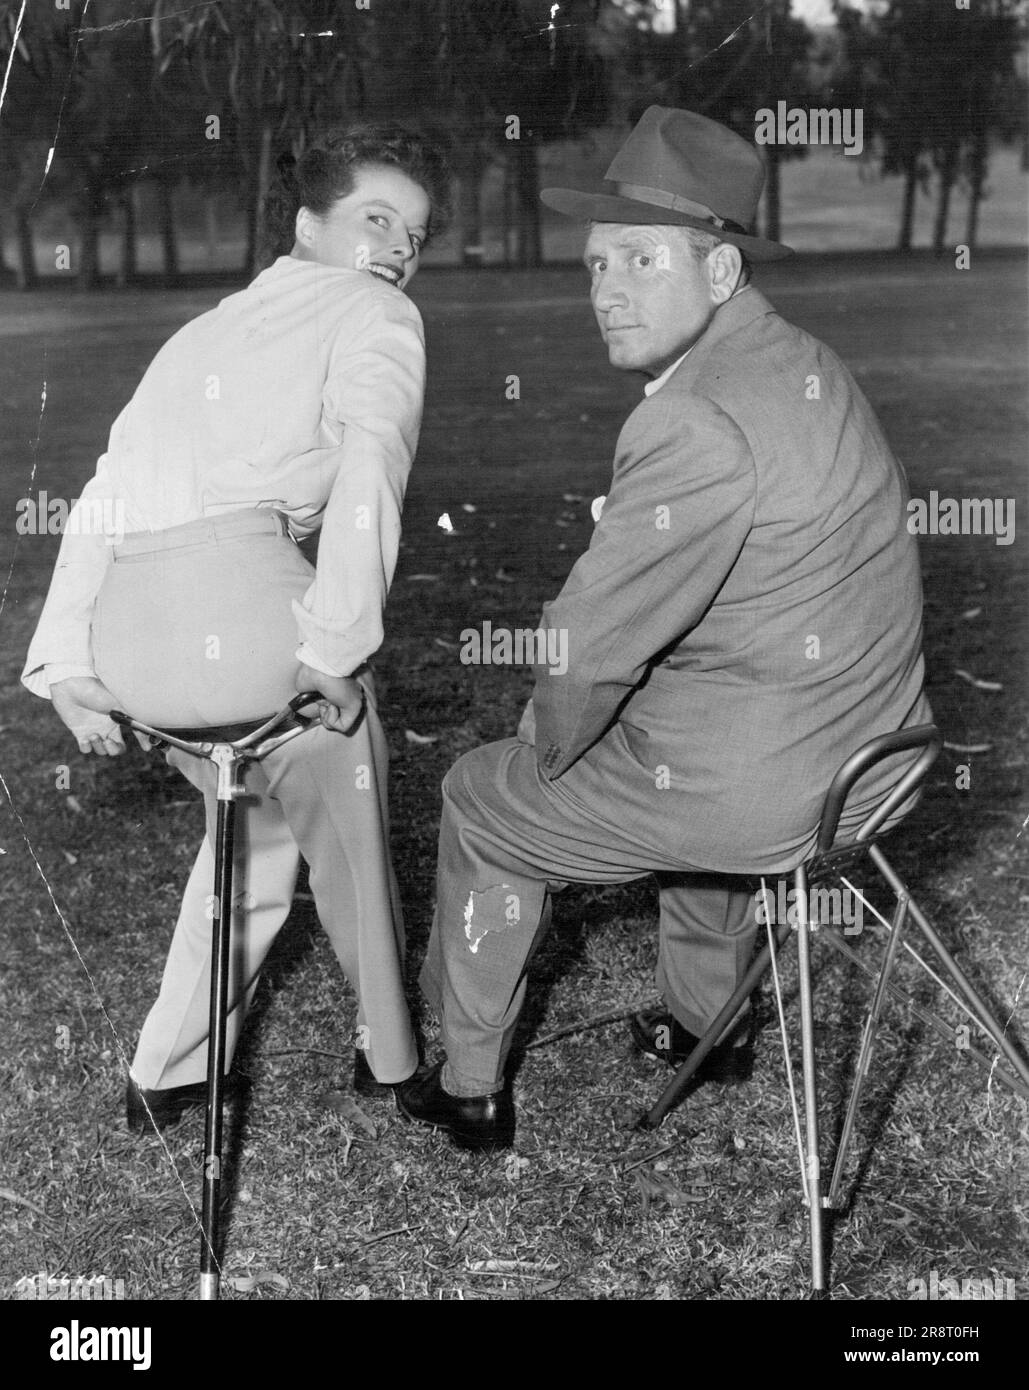 Pause that refreshes... Spencer Tracy and Katharine Hepburn take time out between scenes of their latest M-G-M comedy, 'Pat and Mike'. Directed by George Cukor. Produced by Lawrence Weingarten. Written by Ruth Gordon and Garson Kanin. September 06, 1952. Stock Photo